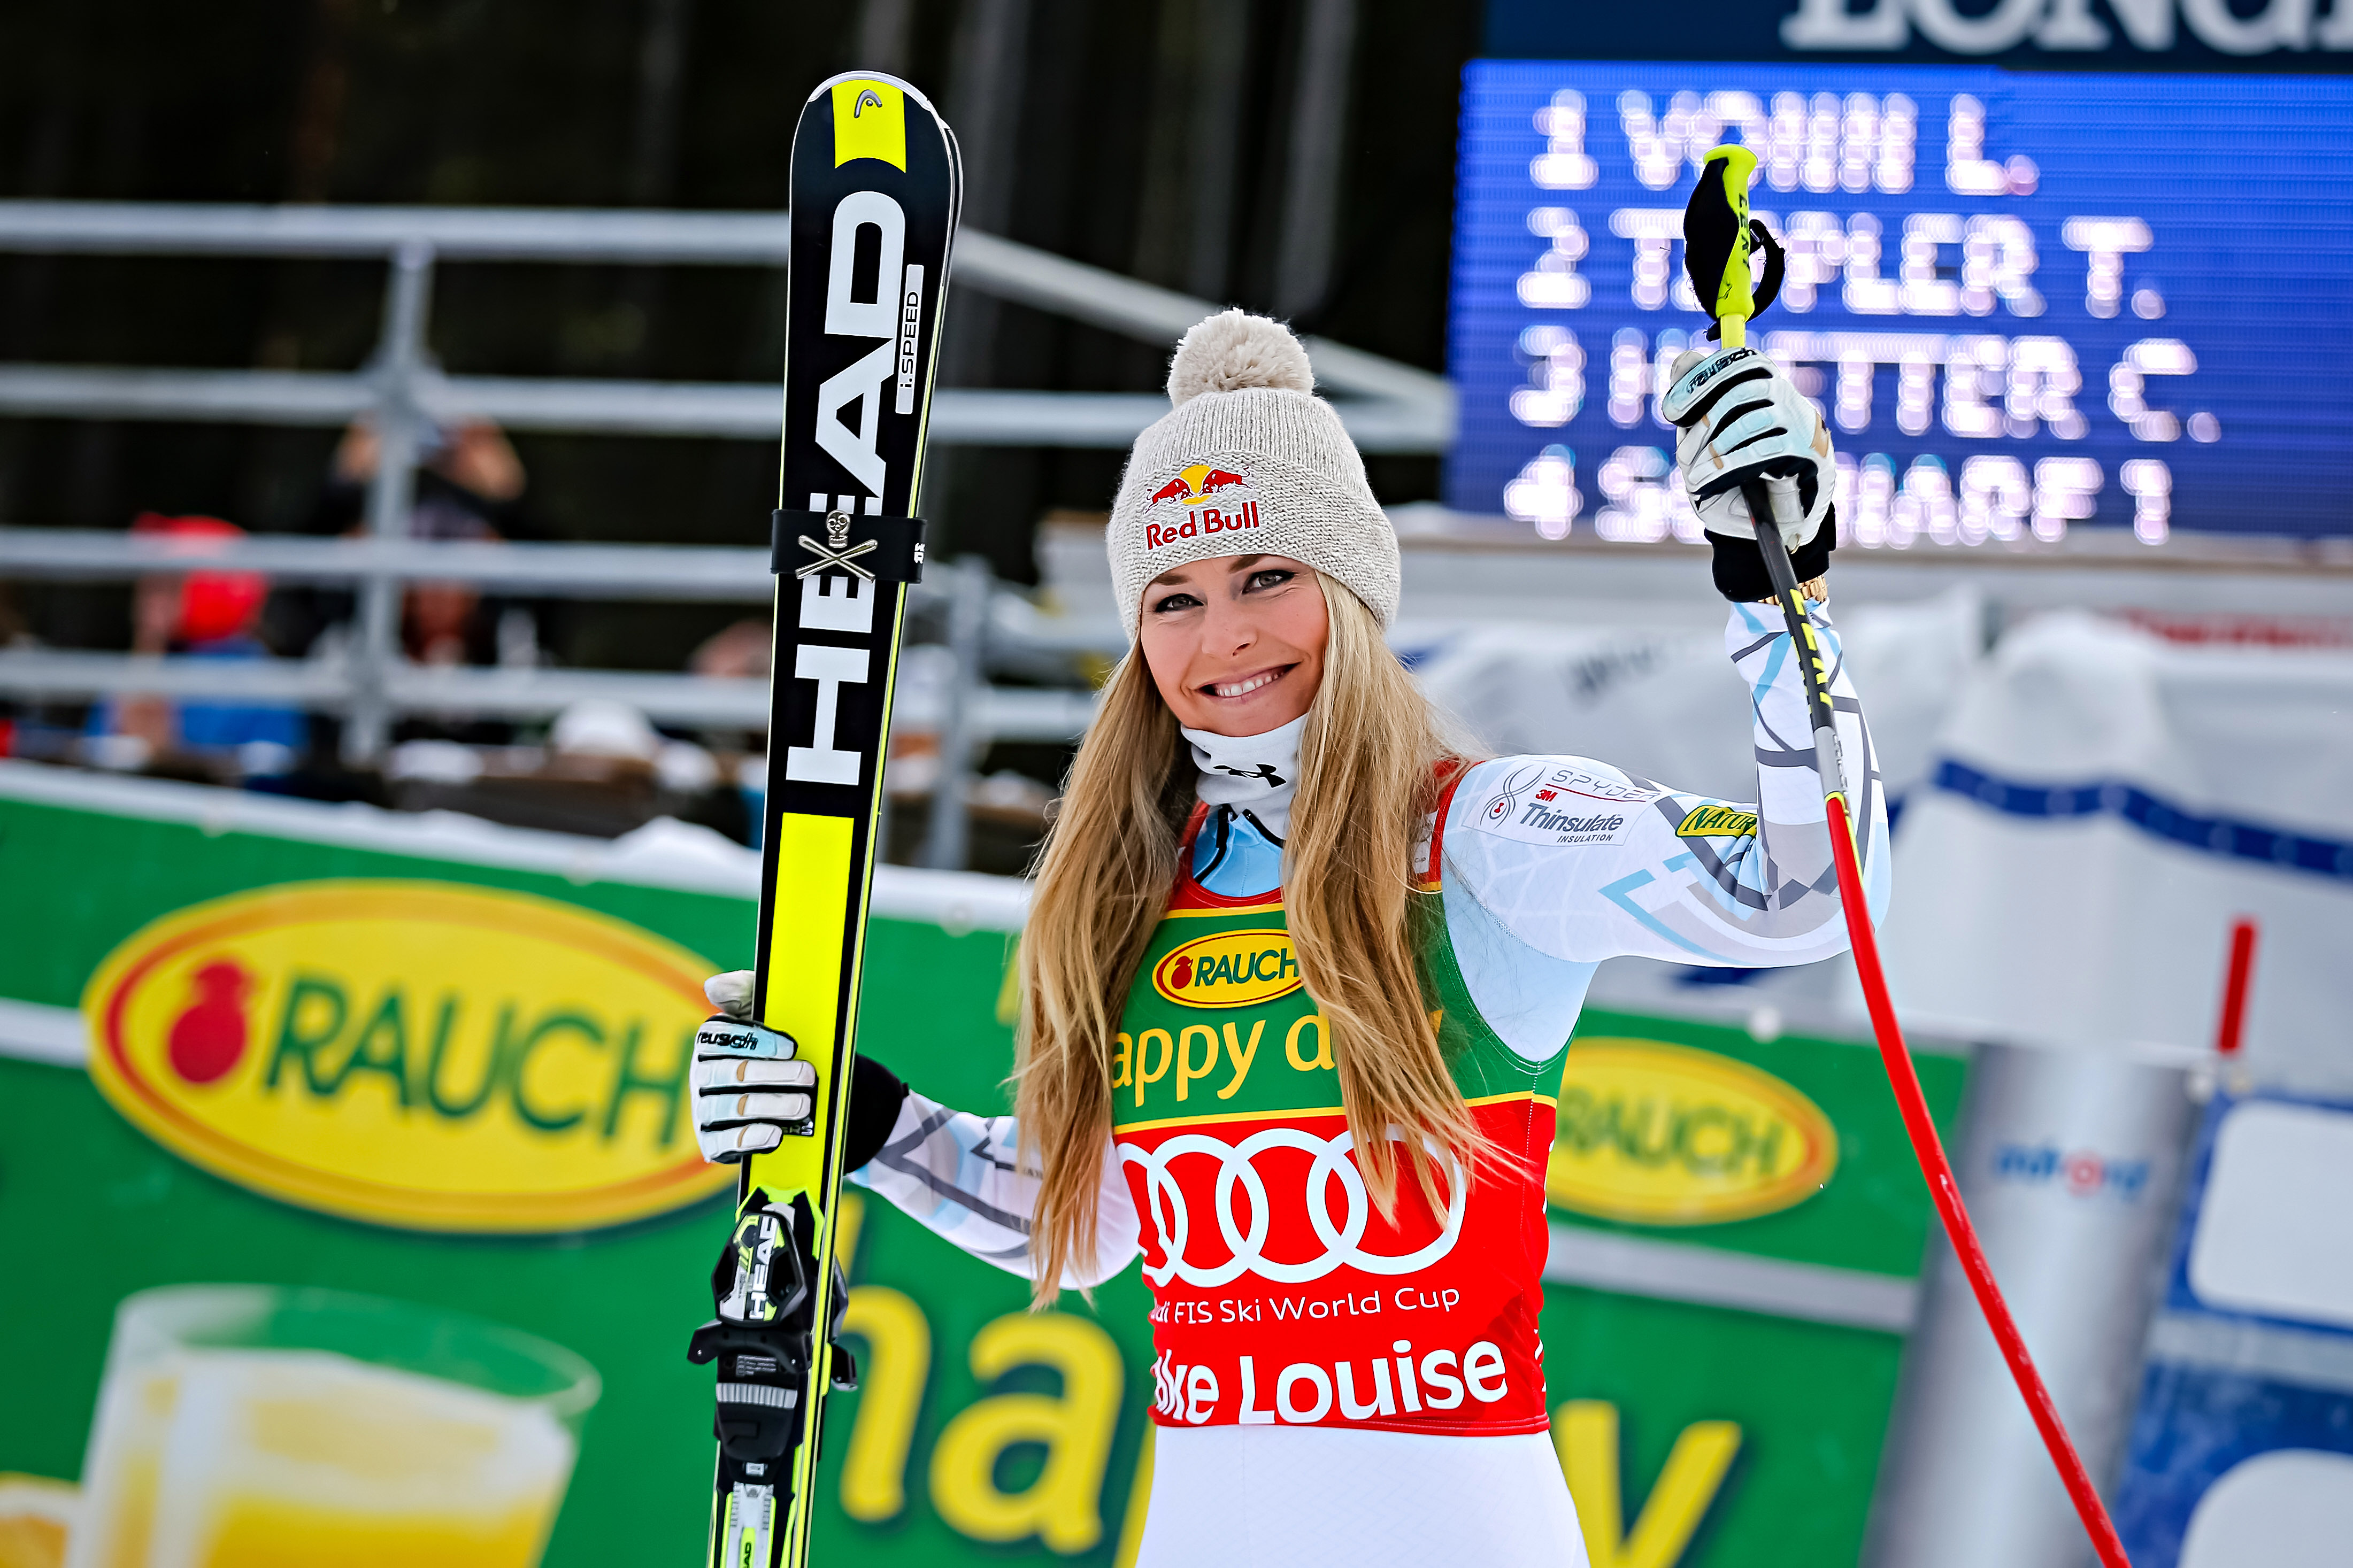 Vonn hoping to return to form heading into Winter Games